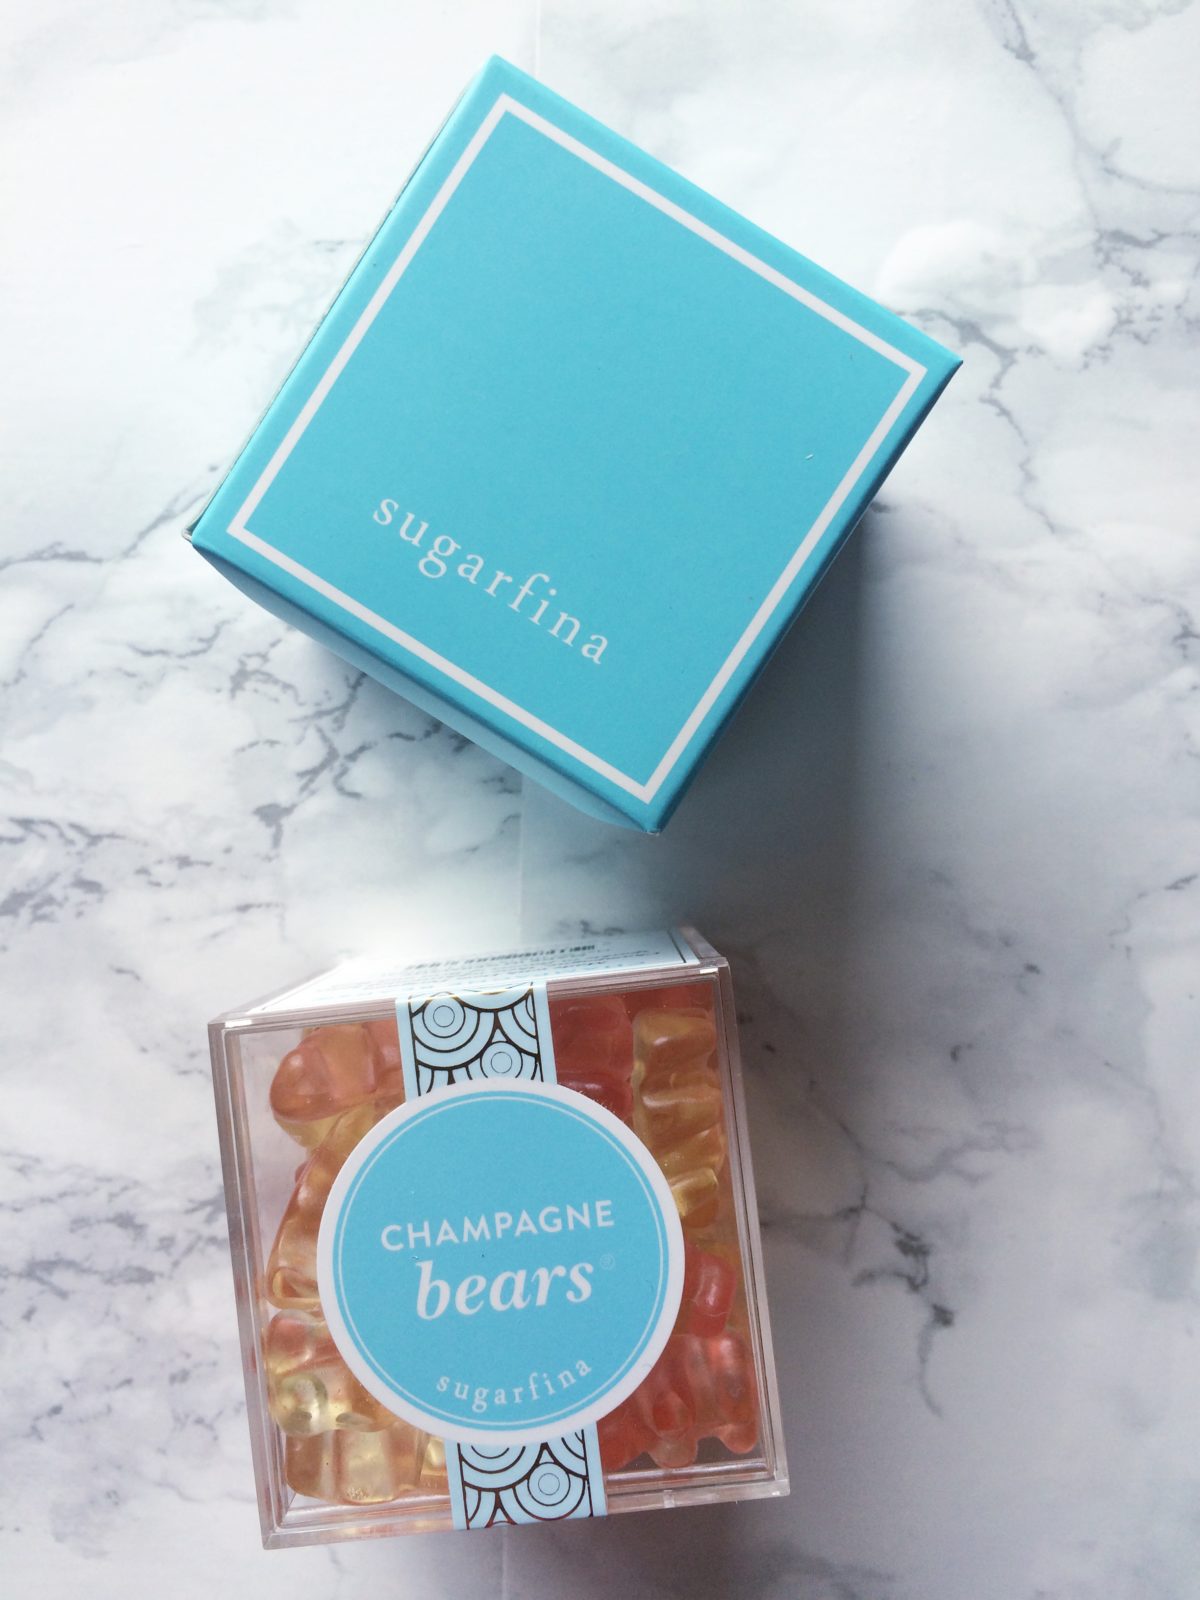 One of the most delicious treats you could ask for. Sugarfina's champagne gummy bears.